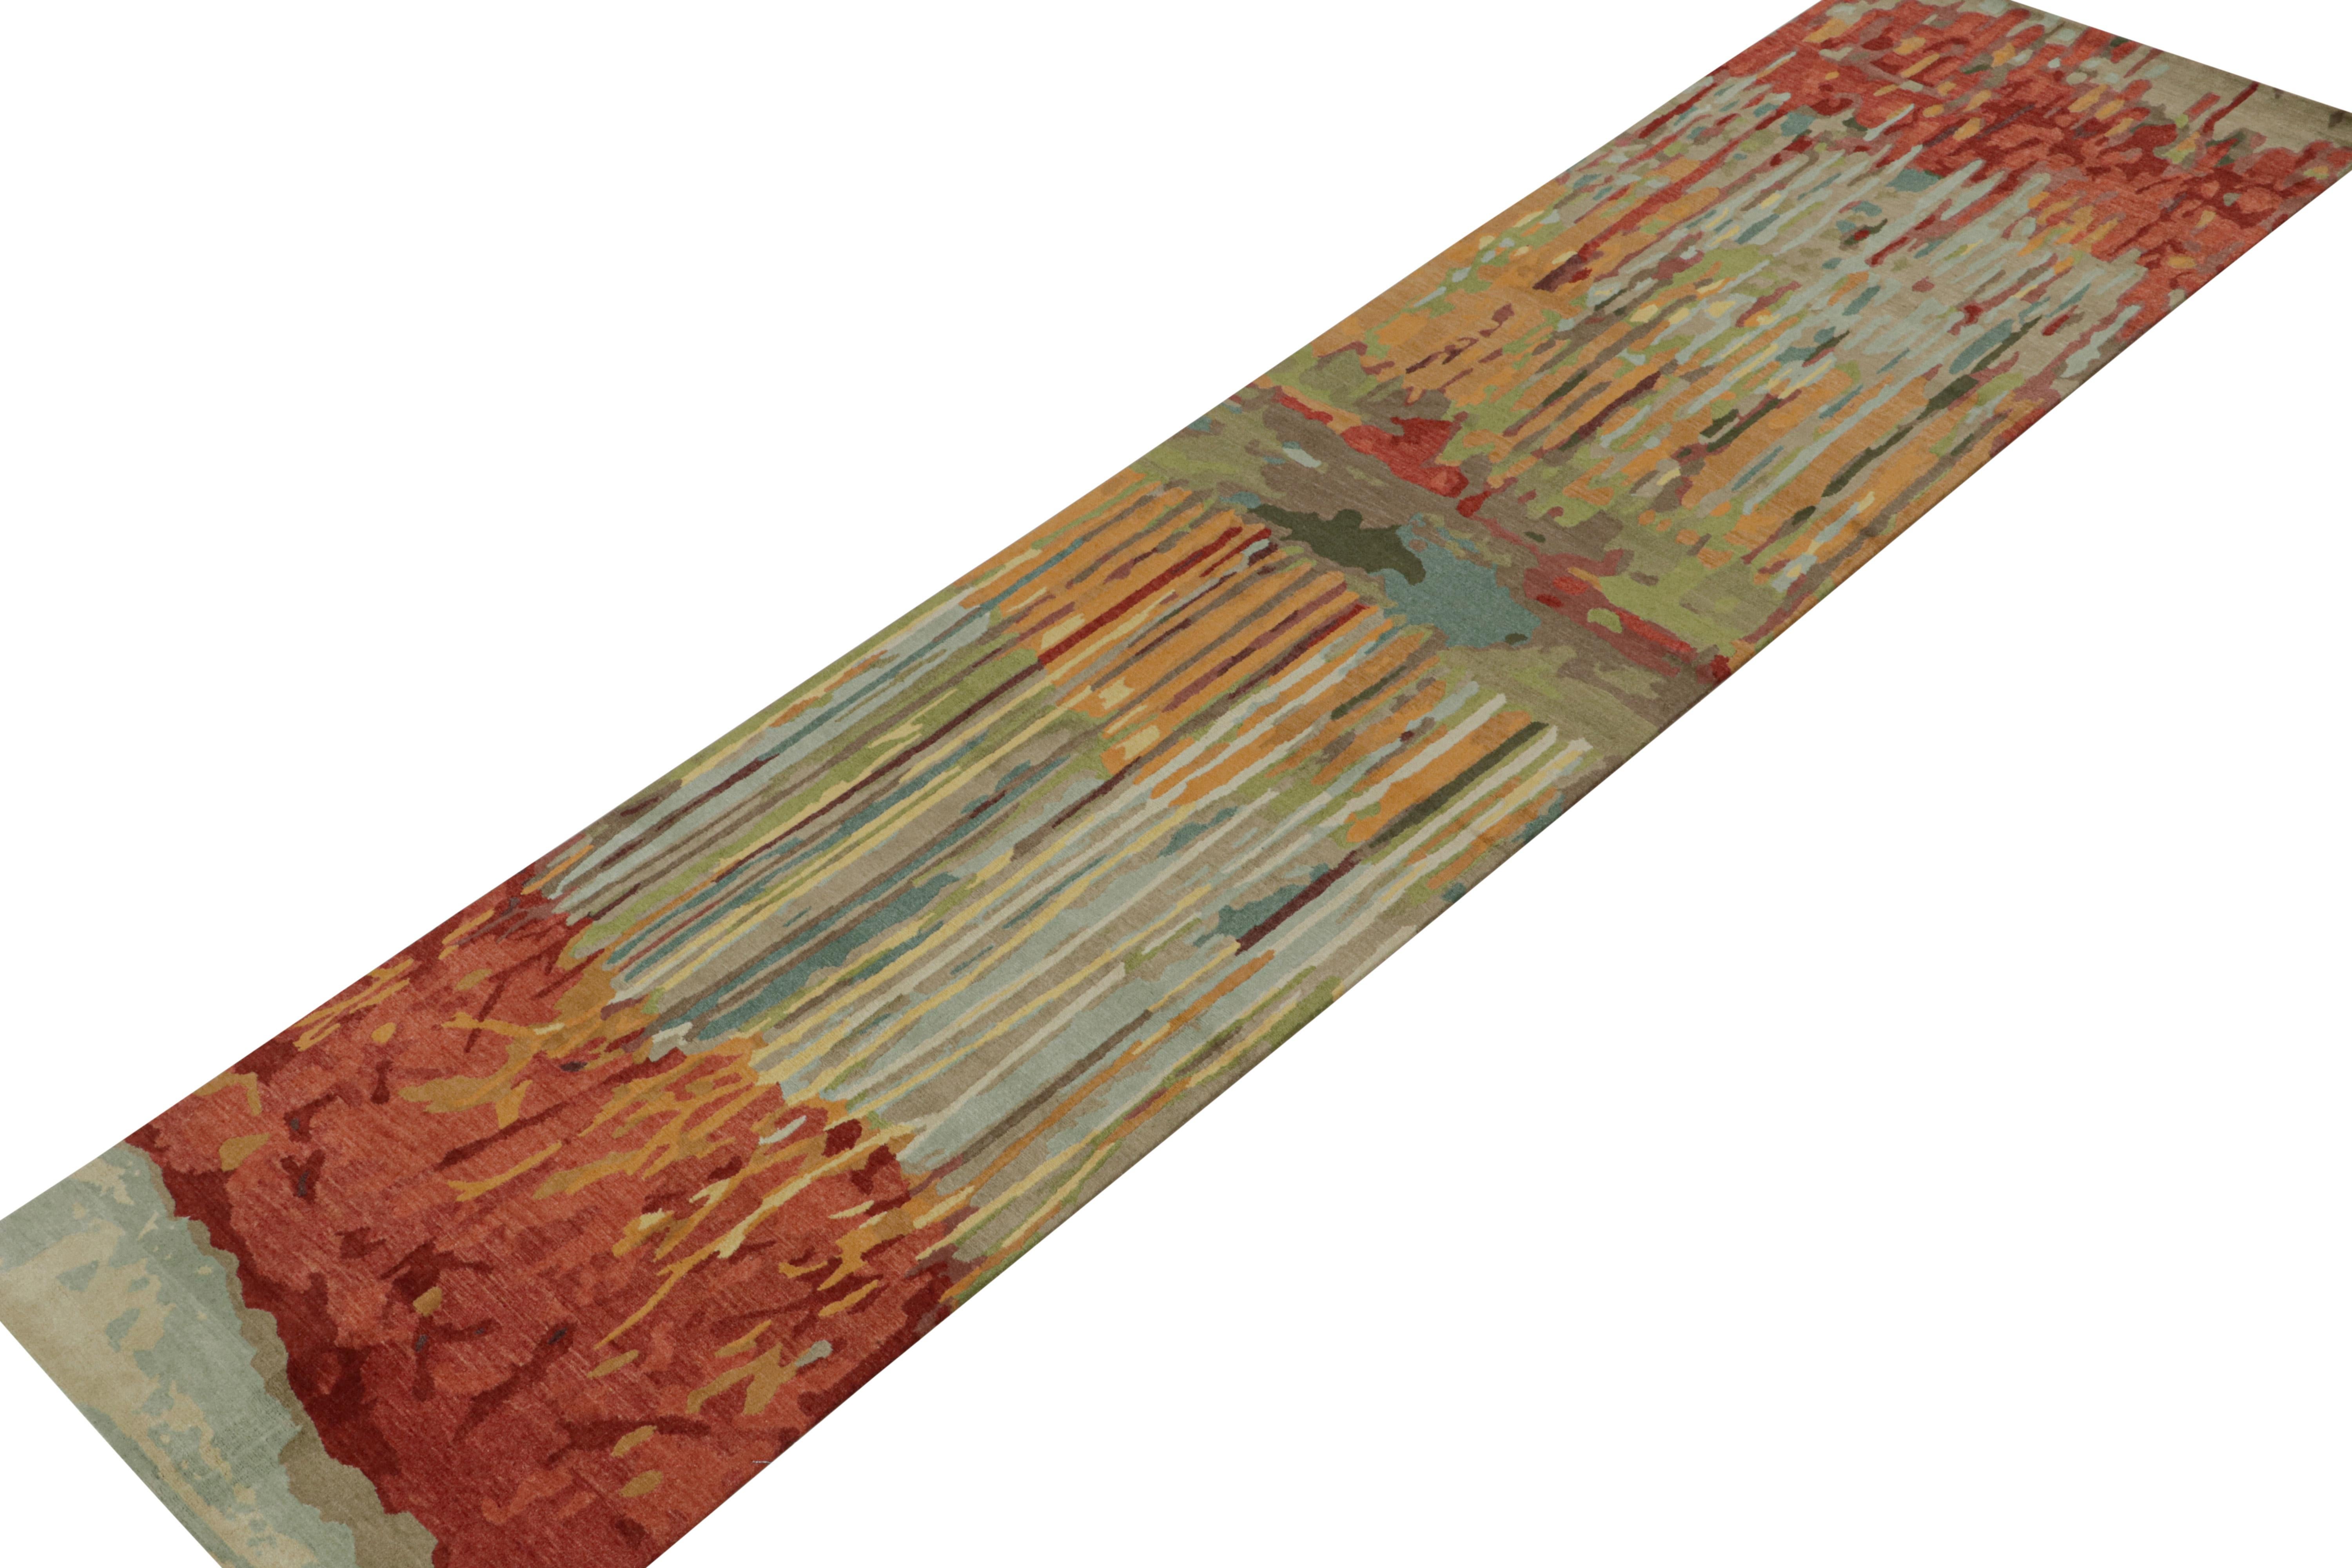 Hand-knotted in wool and silk, this 3x12 abstract runner is a new addition to the Modern Collection by Rug & Kilim.

On the Design:

The rug boasts an expressive & bright persona with vibrant tones of red, blue, green & blue. This exuberant piece is